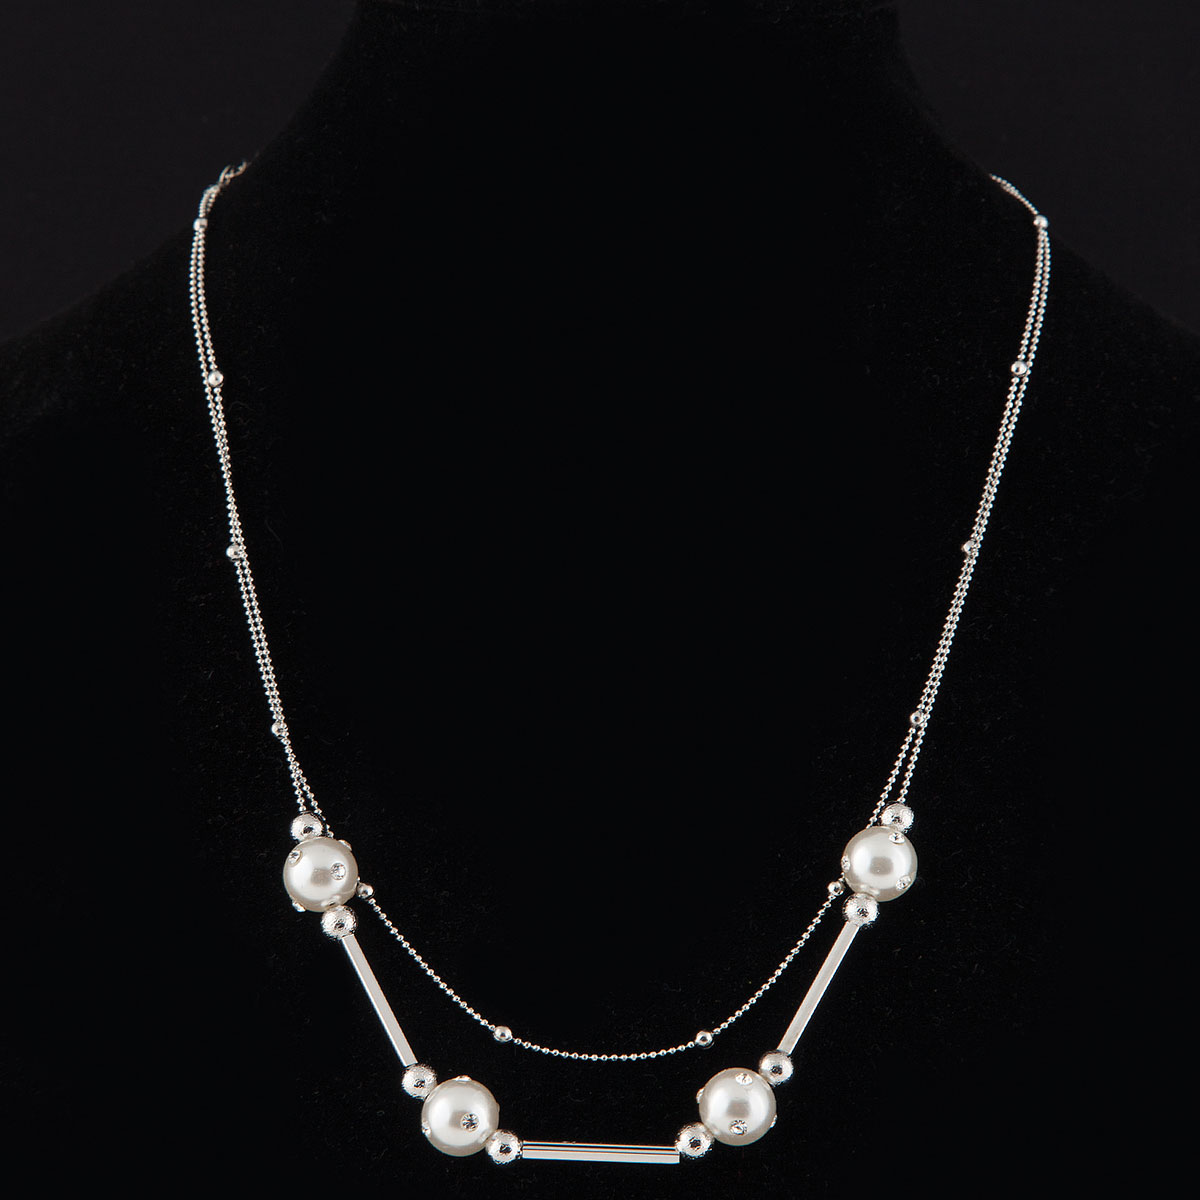 Delicate Pearls with Silver Balls Double Chain Necklace 16" 50sp